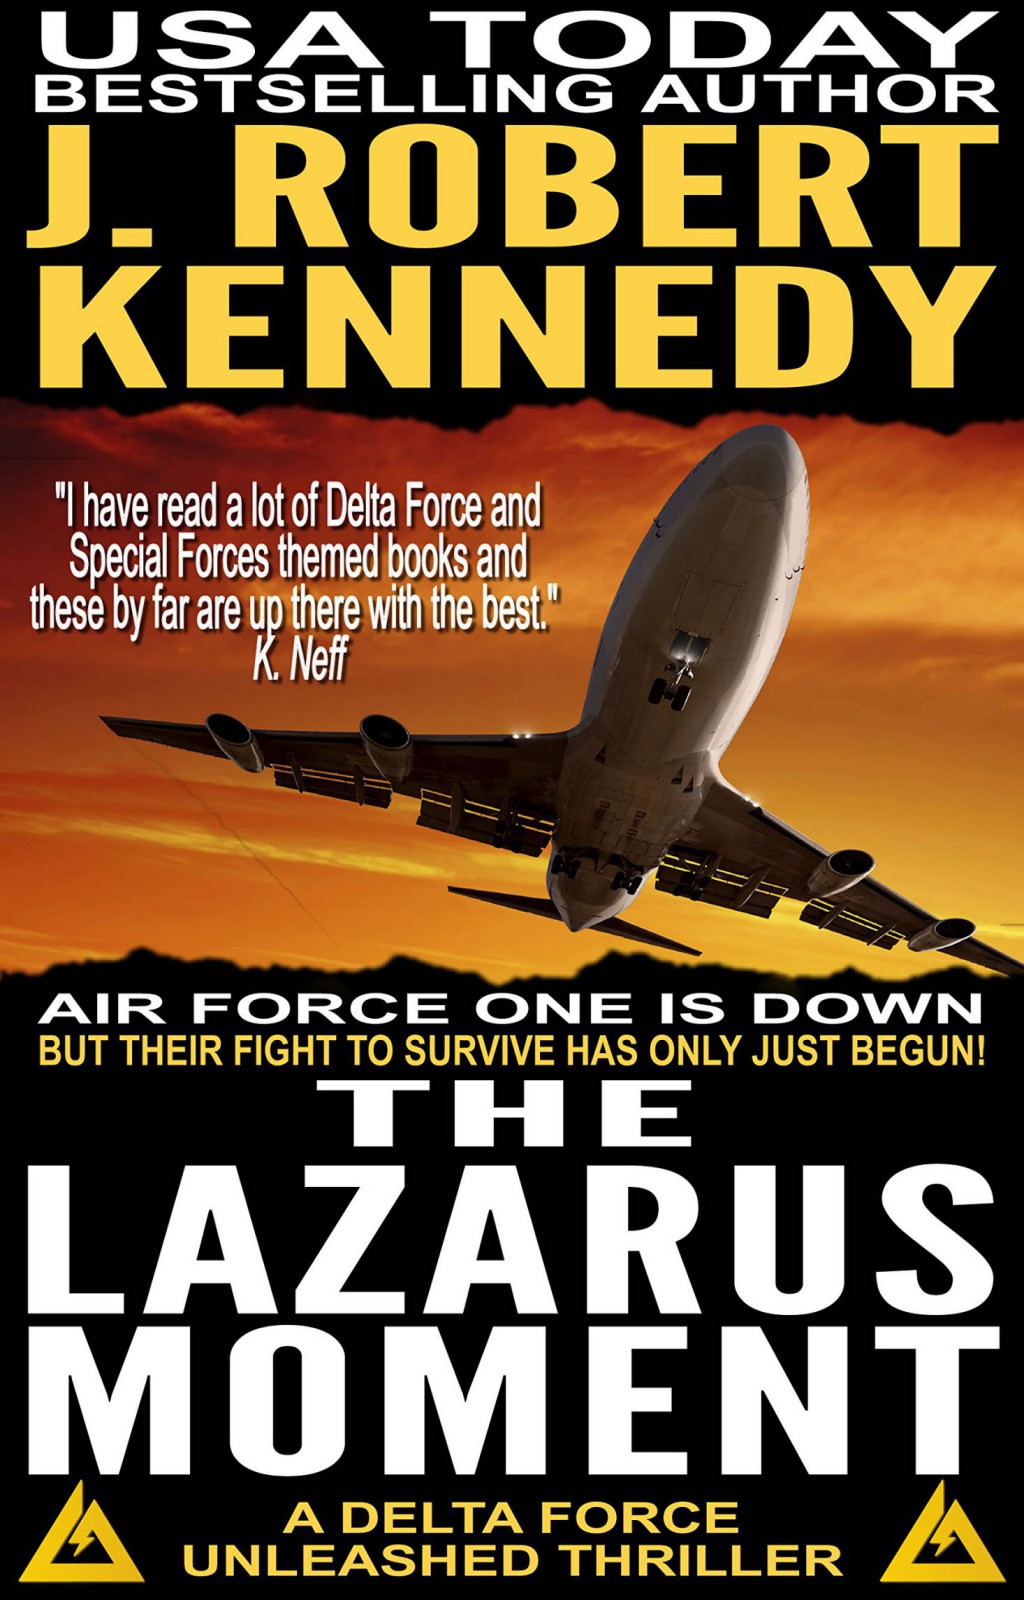 The Lazarus Moment by J. Robert Kennedy